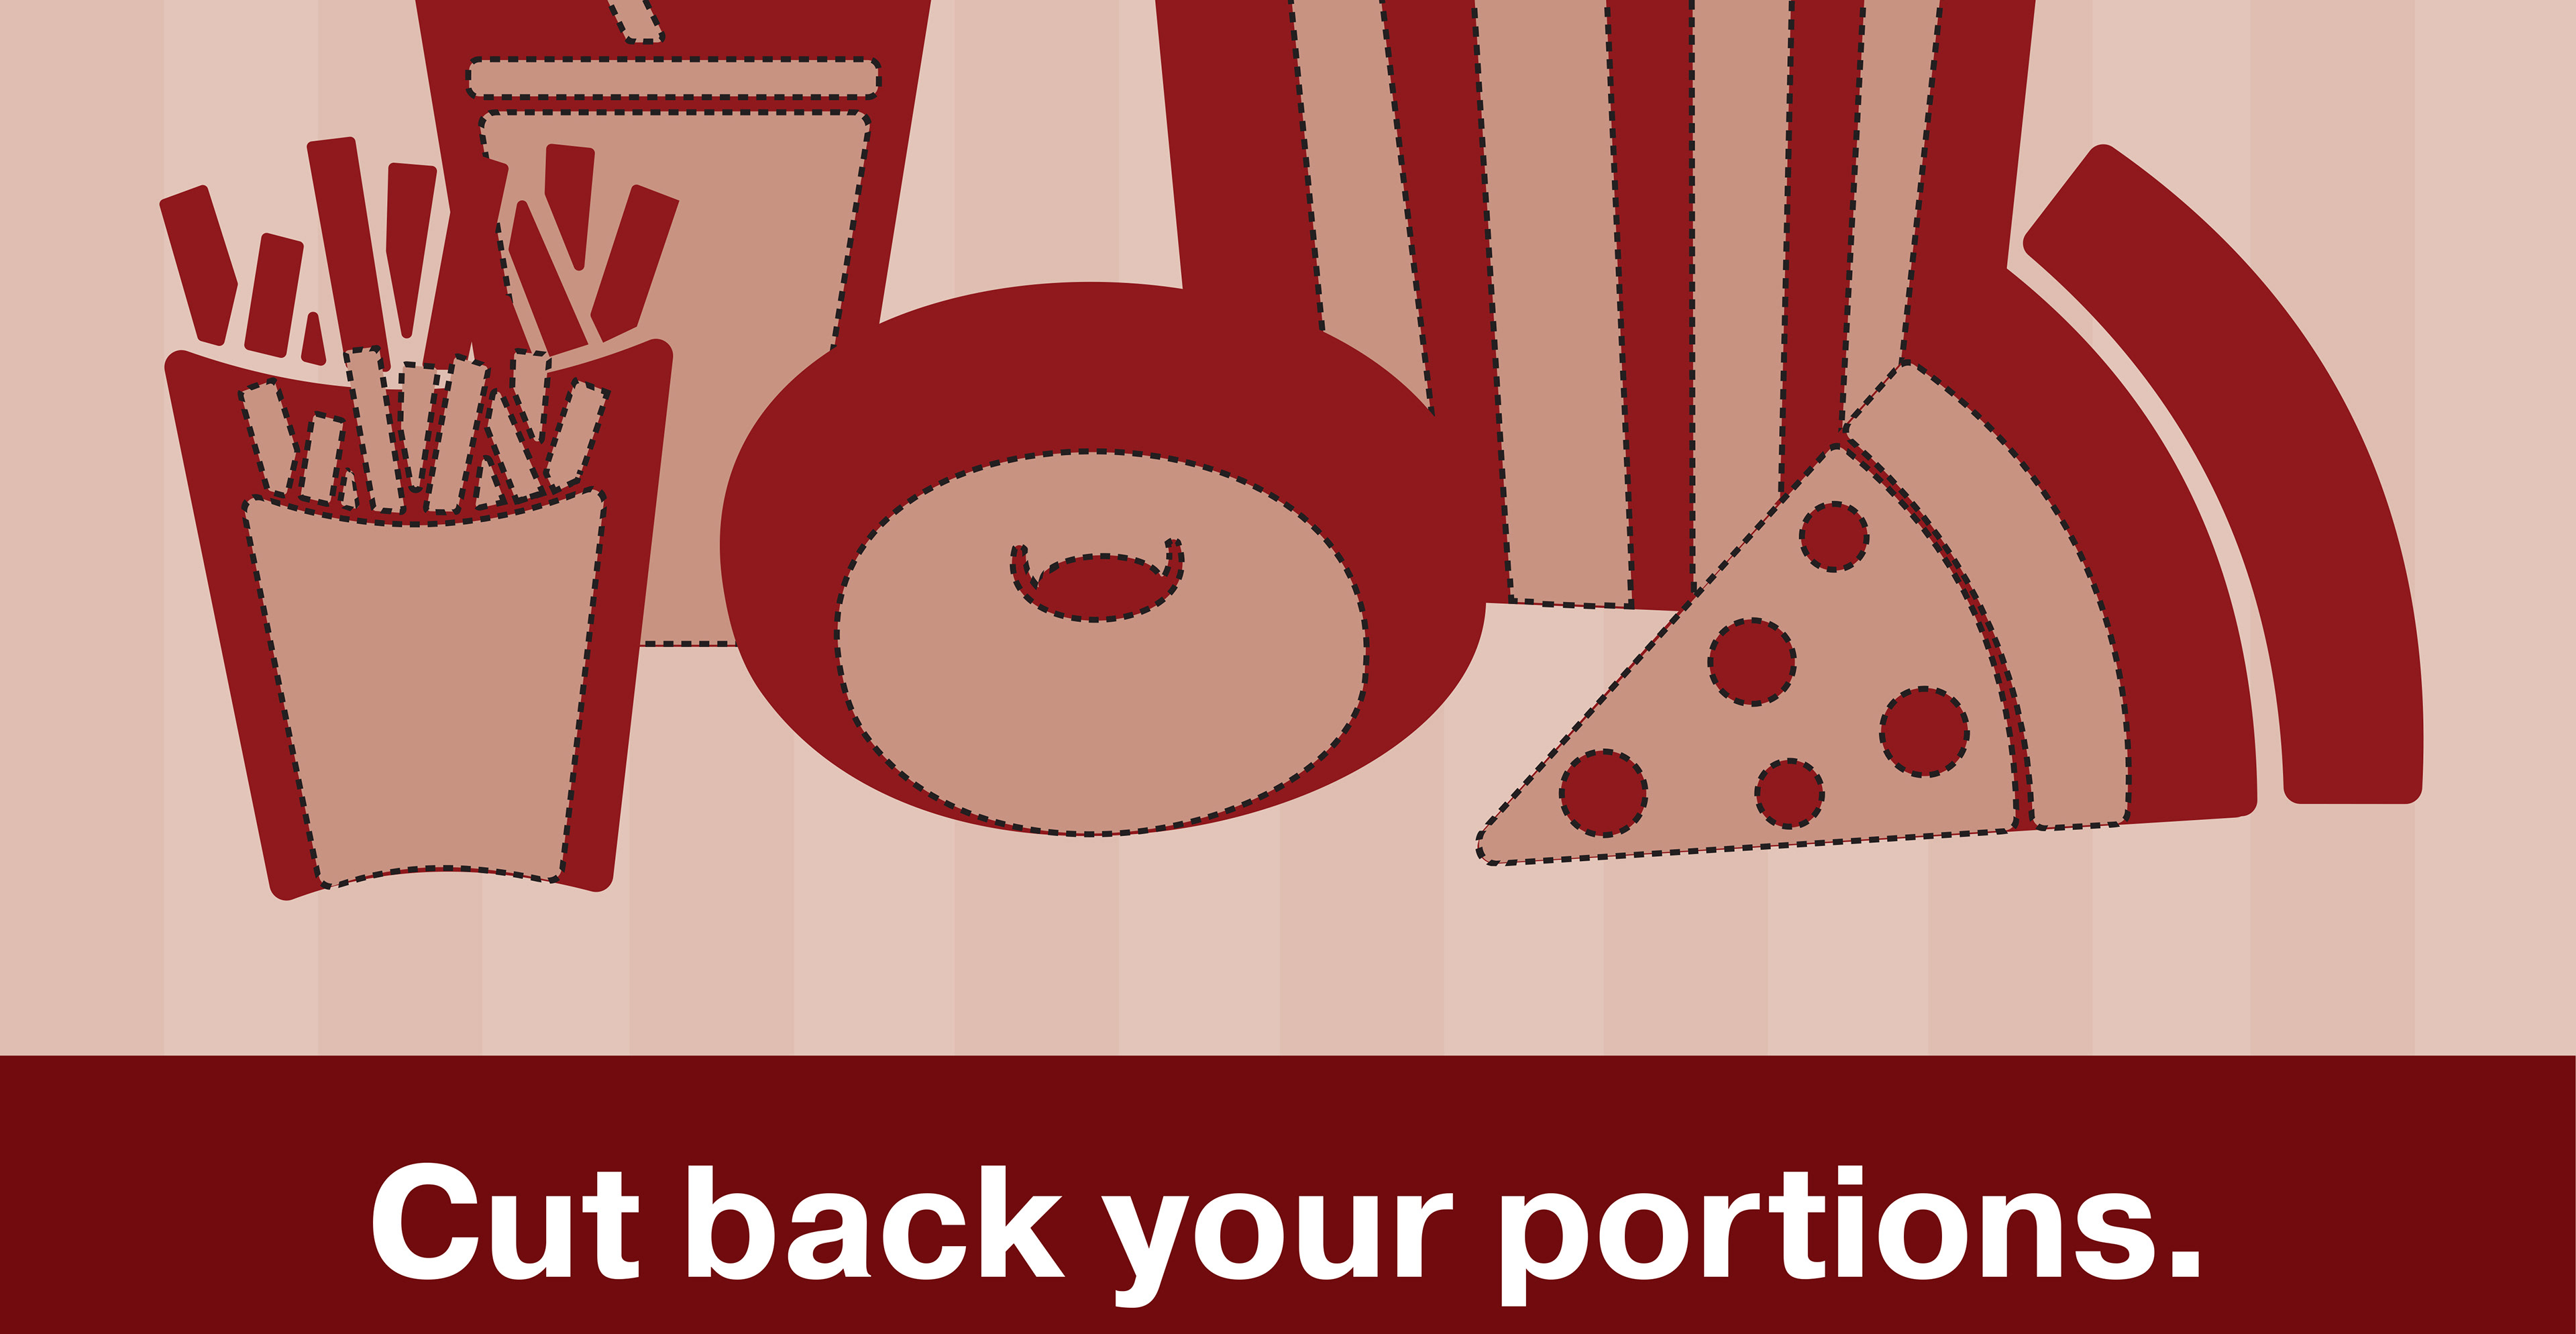 Take Control of Your Portions Poster: Portion Control Poster